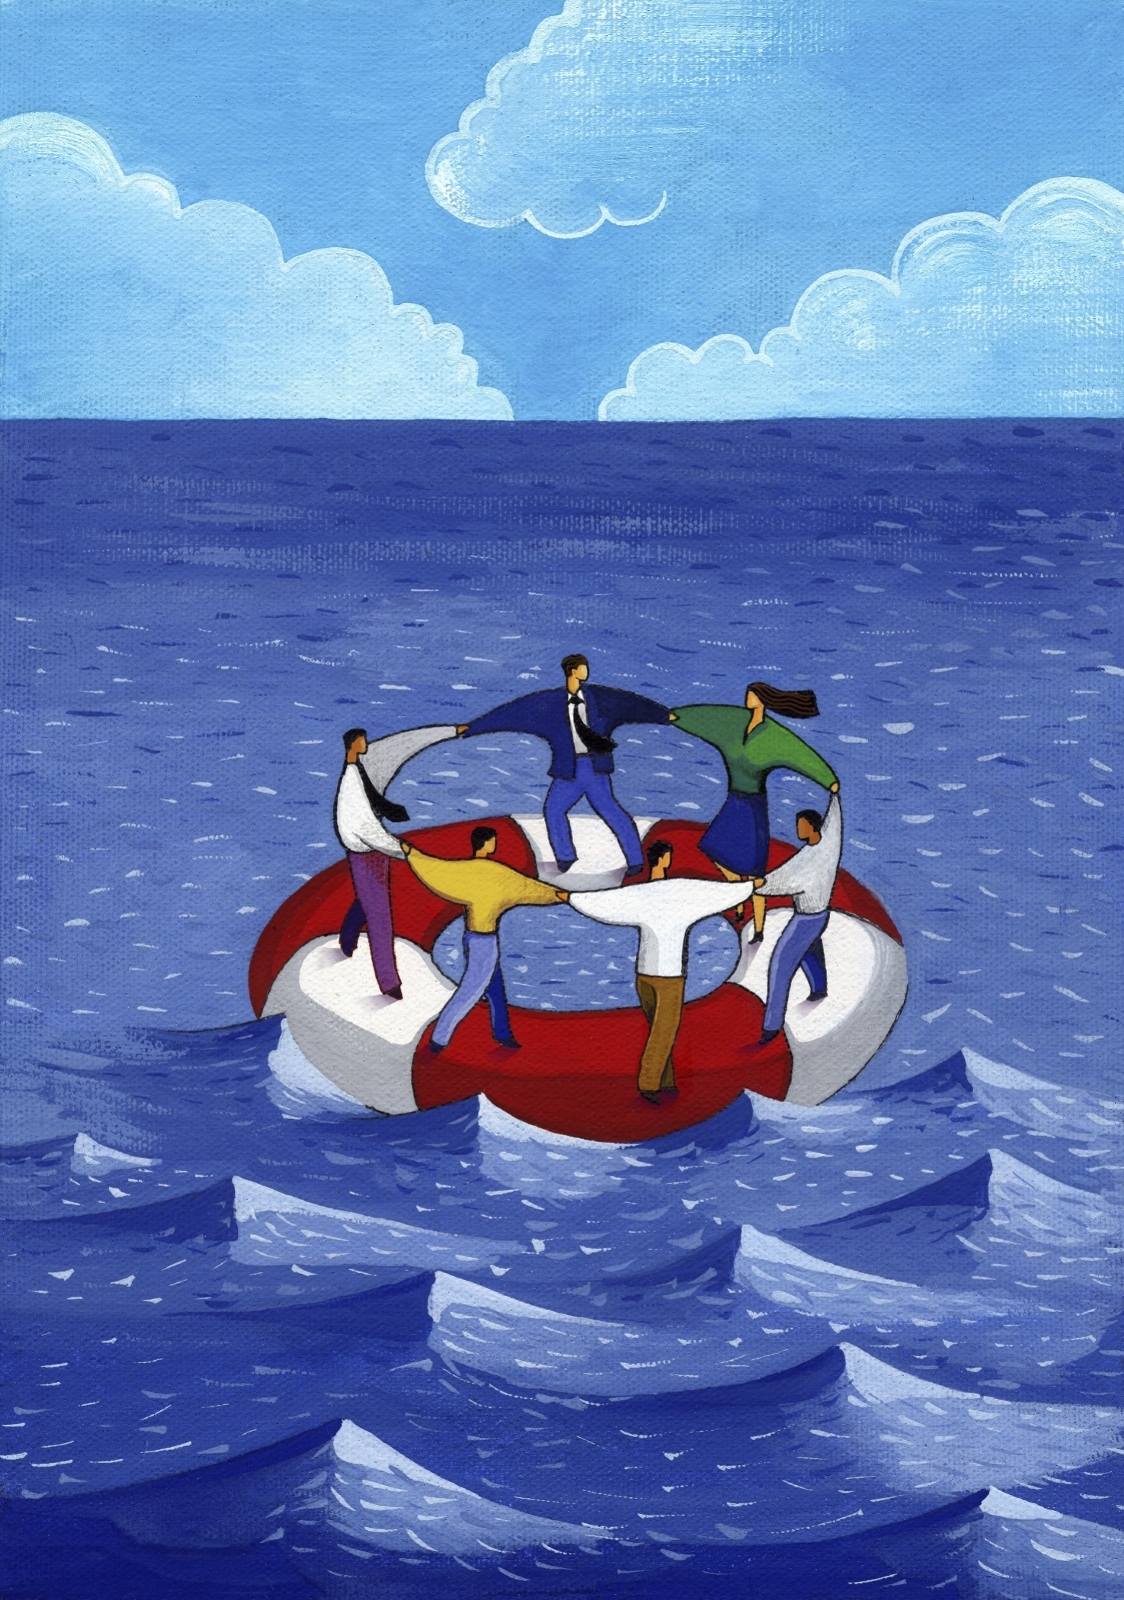 Illustration of businesspeople on a life raft in open water